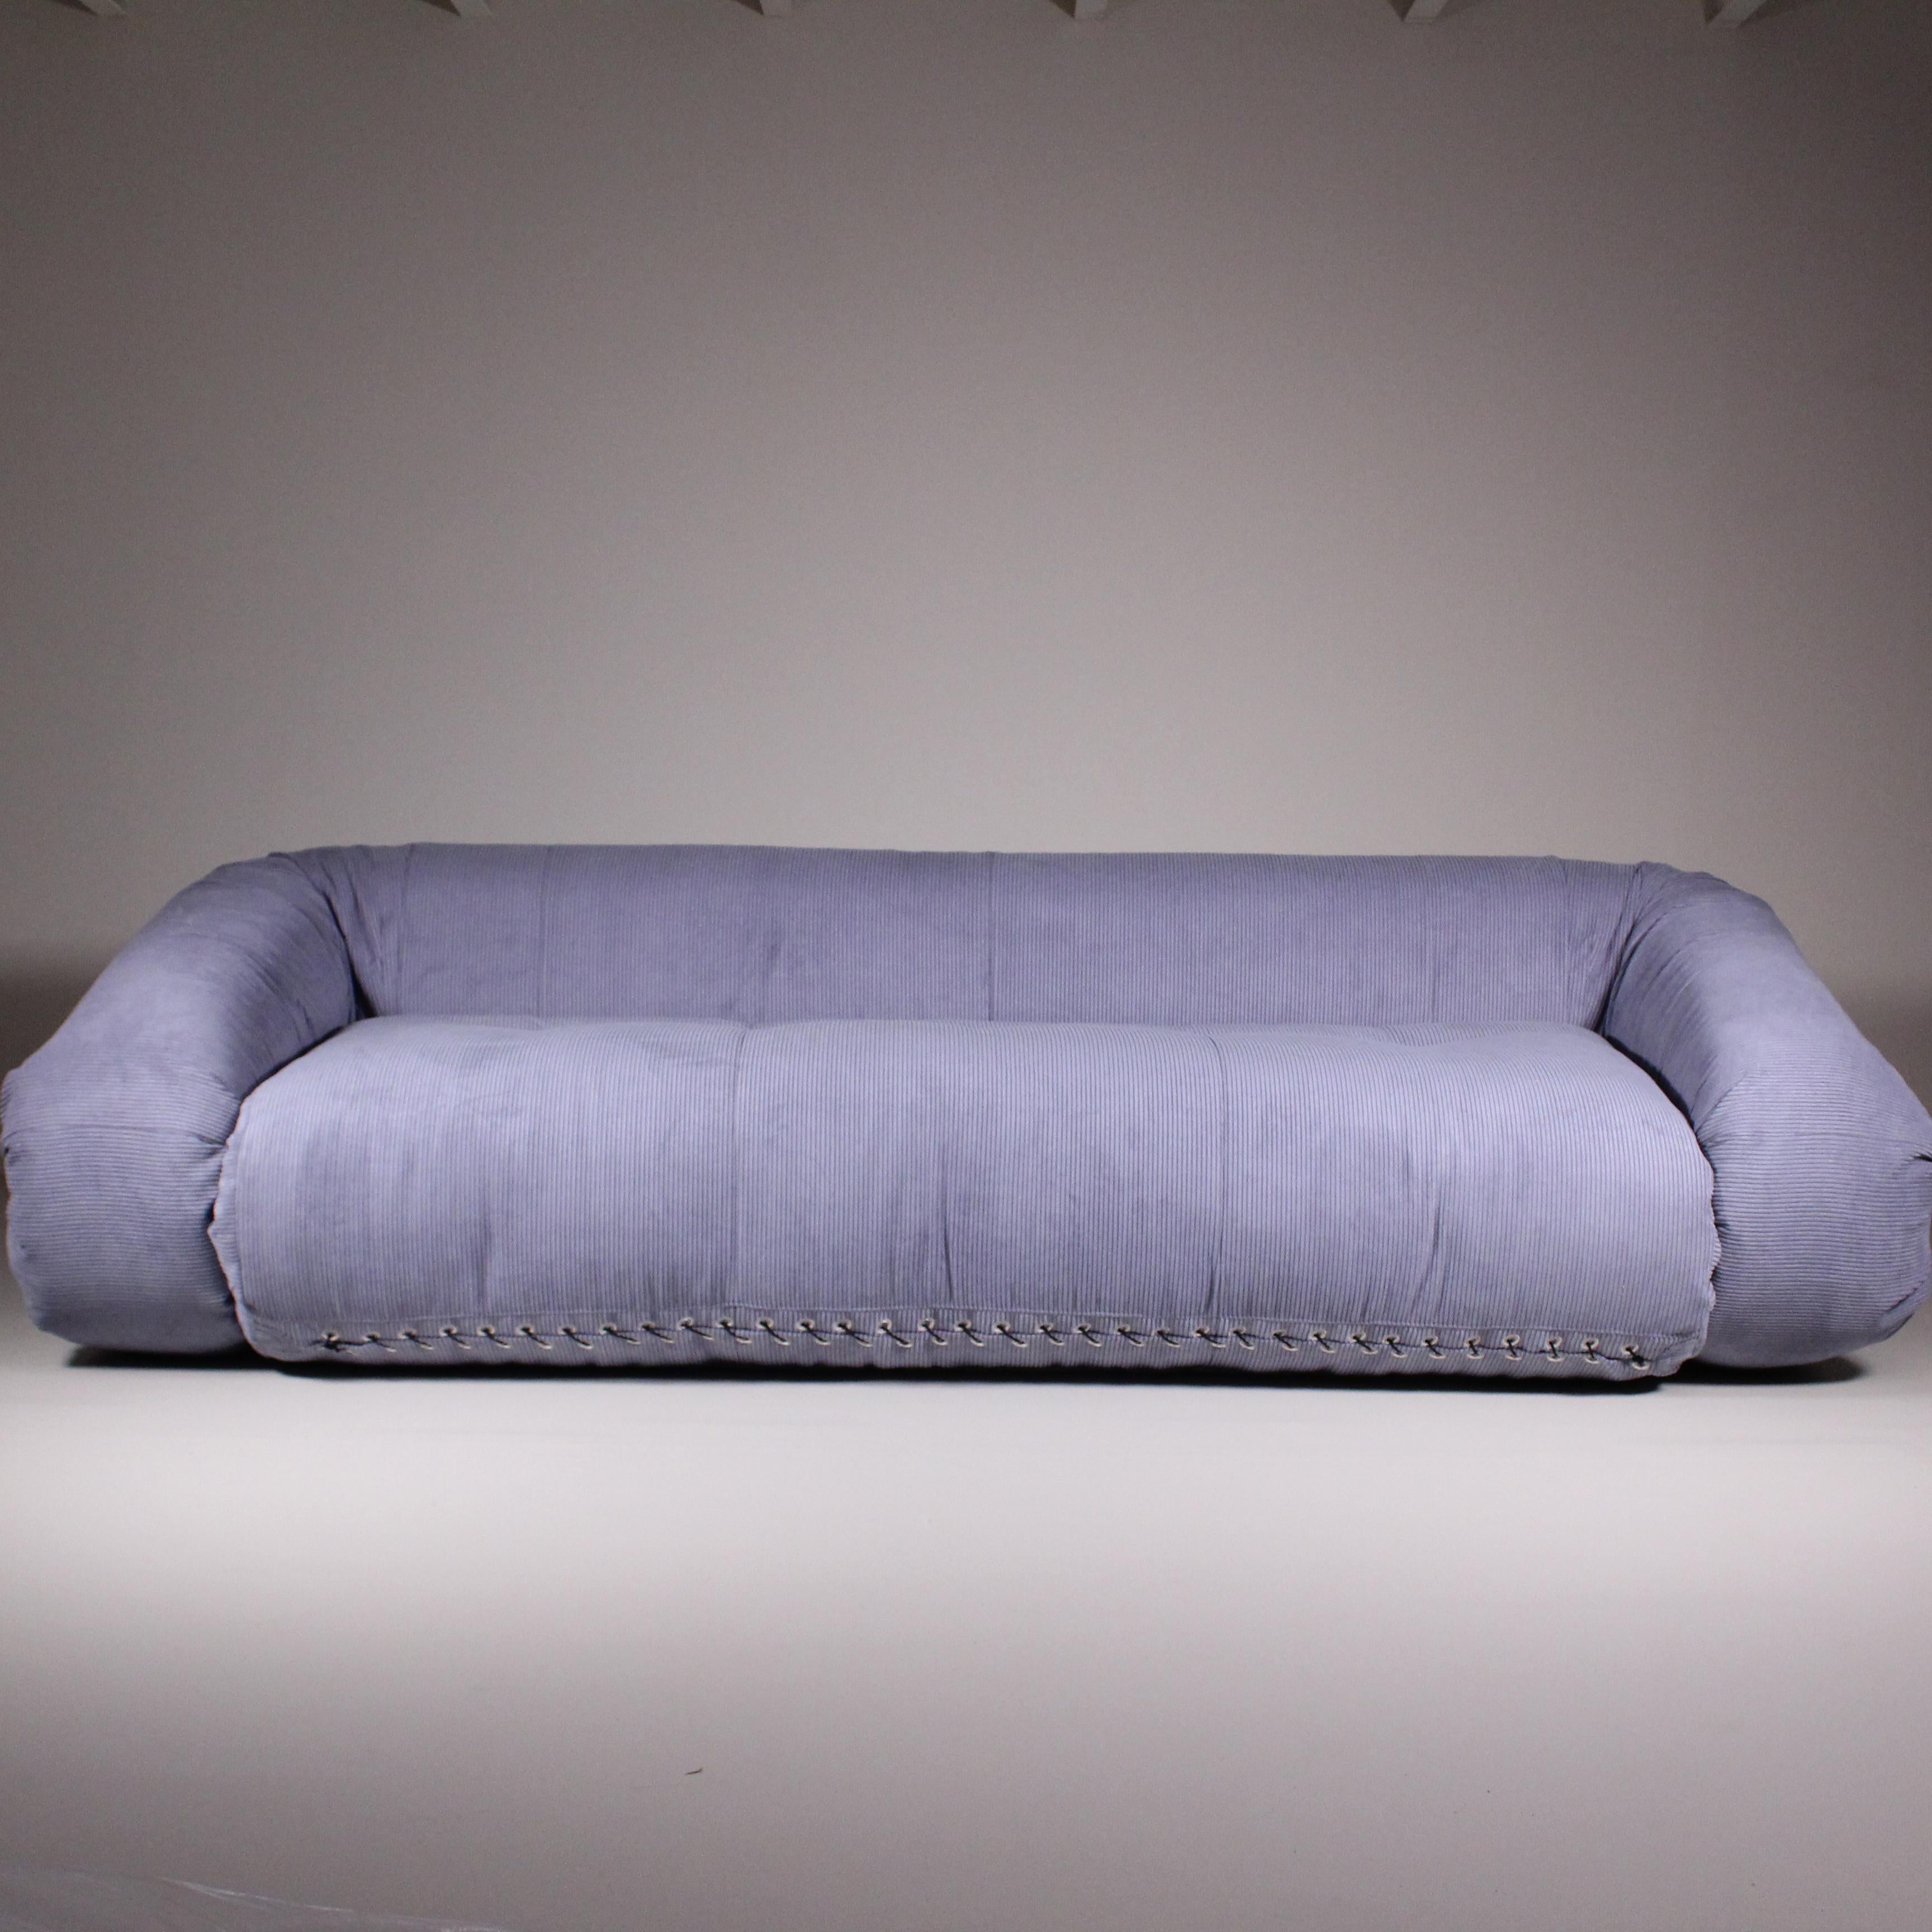 The Anfibio Sofa, designed by Alessandro Becchi for Giovannetti around 1971, is a design icon that embodies the innovative essence and versatility of 1970s furniture. This extraordinary piece stands out for its ability to adapt to the changing needs